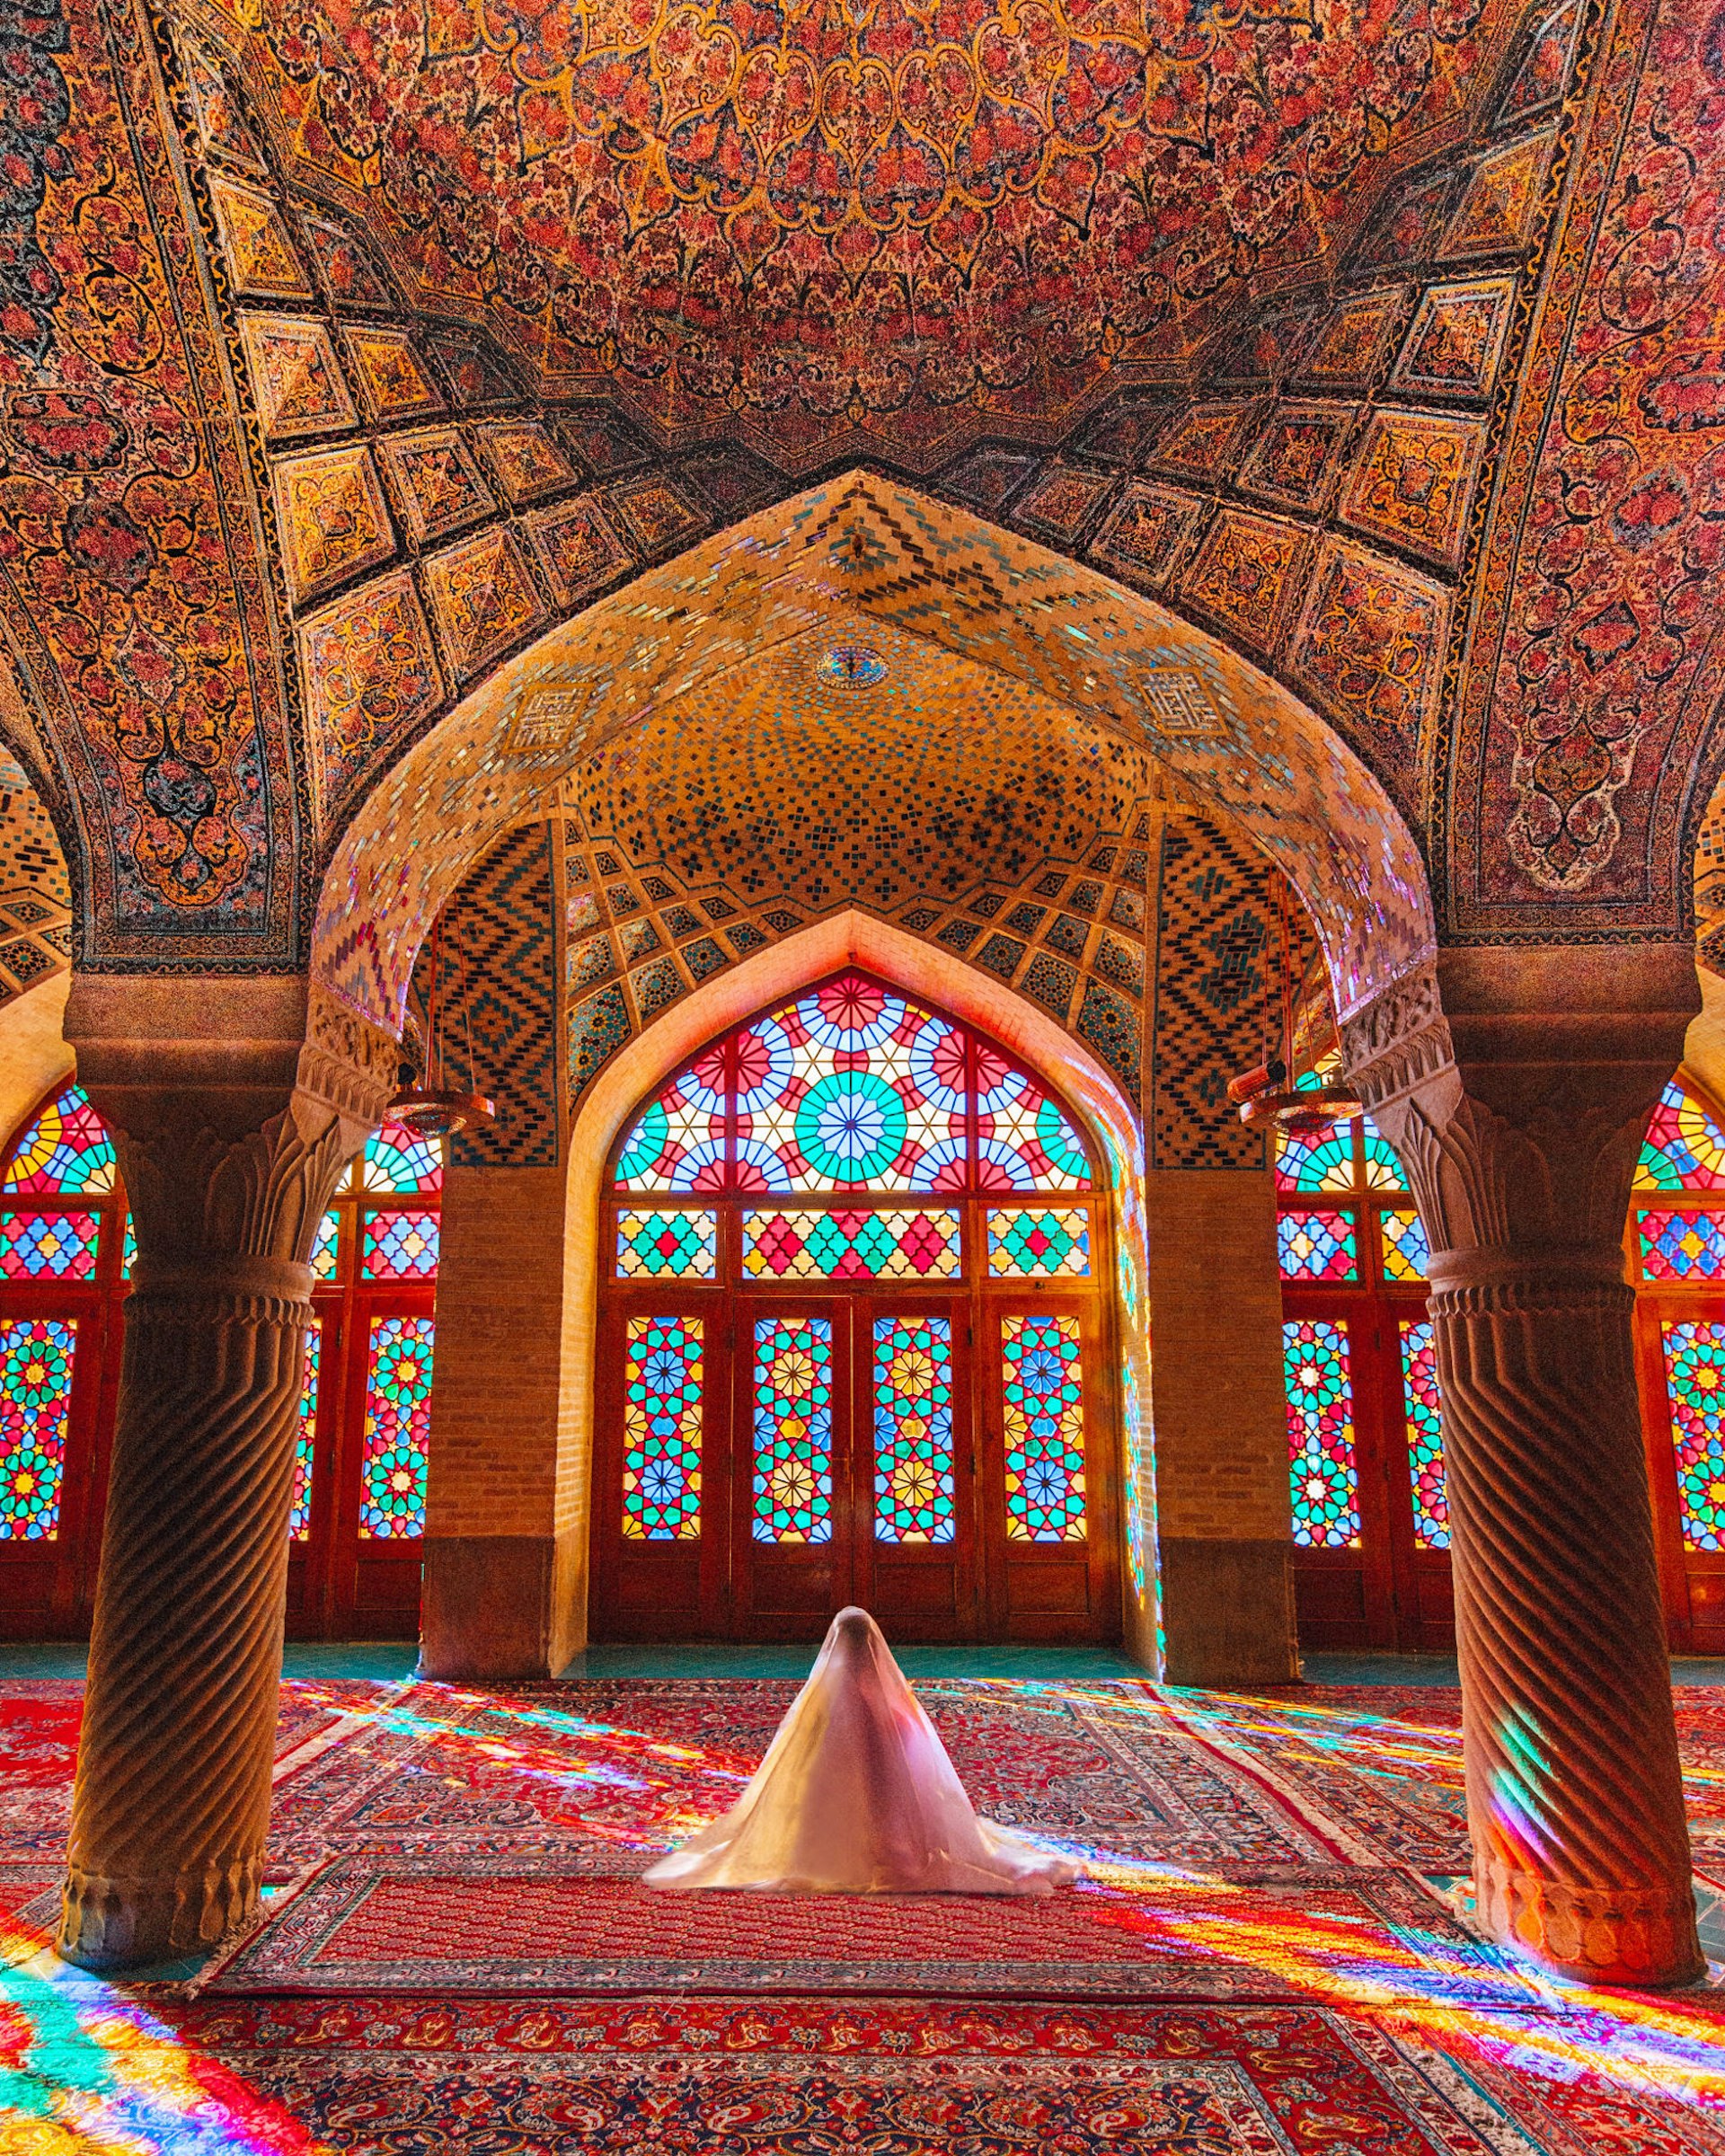 Symmetry looks great on Instagram; inside the colourful Nasir-ol-molk Mosque in Iran; there is an intricately patterned red carpet, and columns support a vaulted ceiling adorned with astonishingly detailed tilework. In the centre someone is praying covered in a white veil.